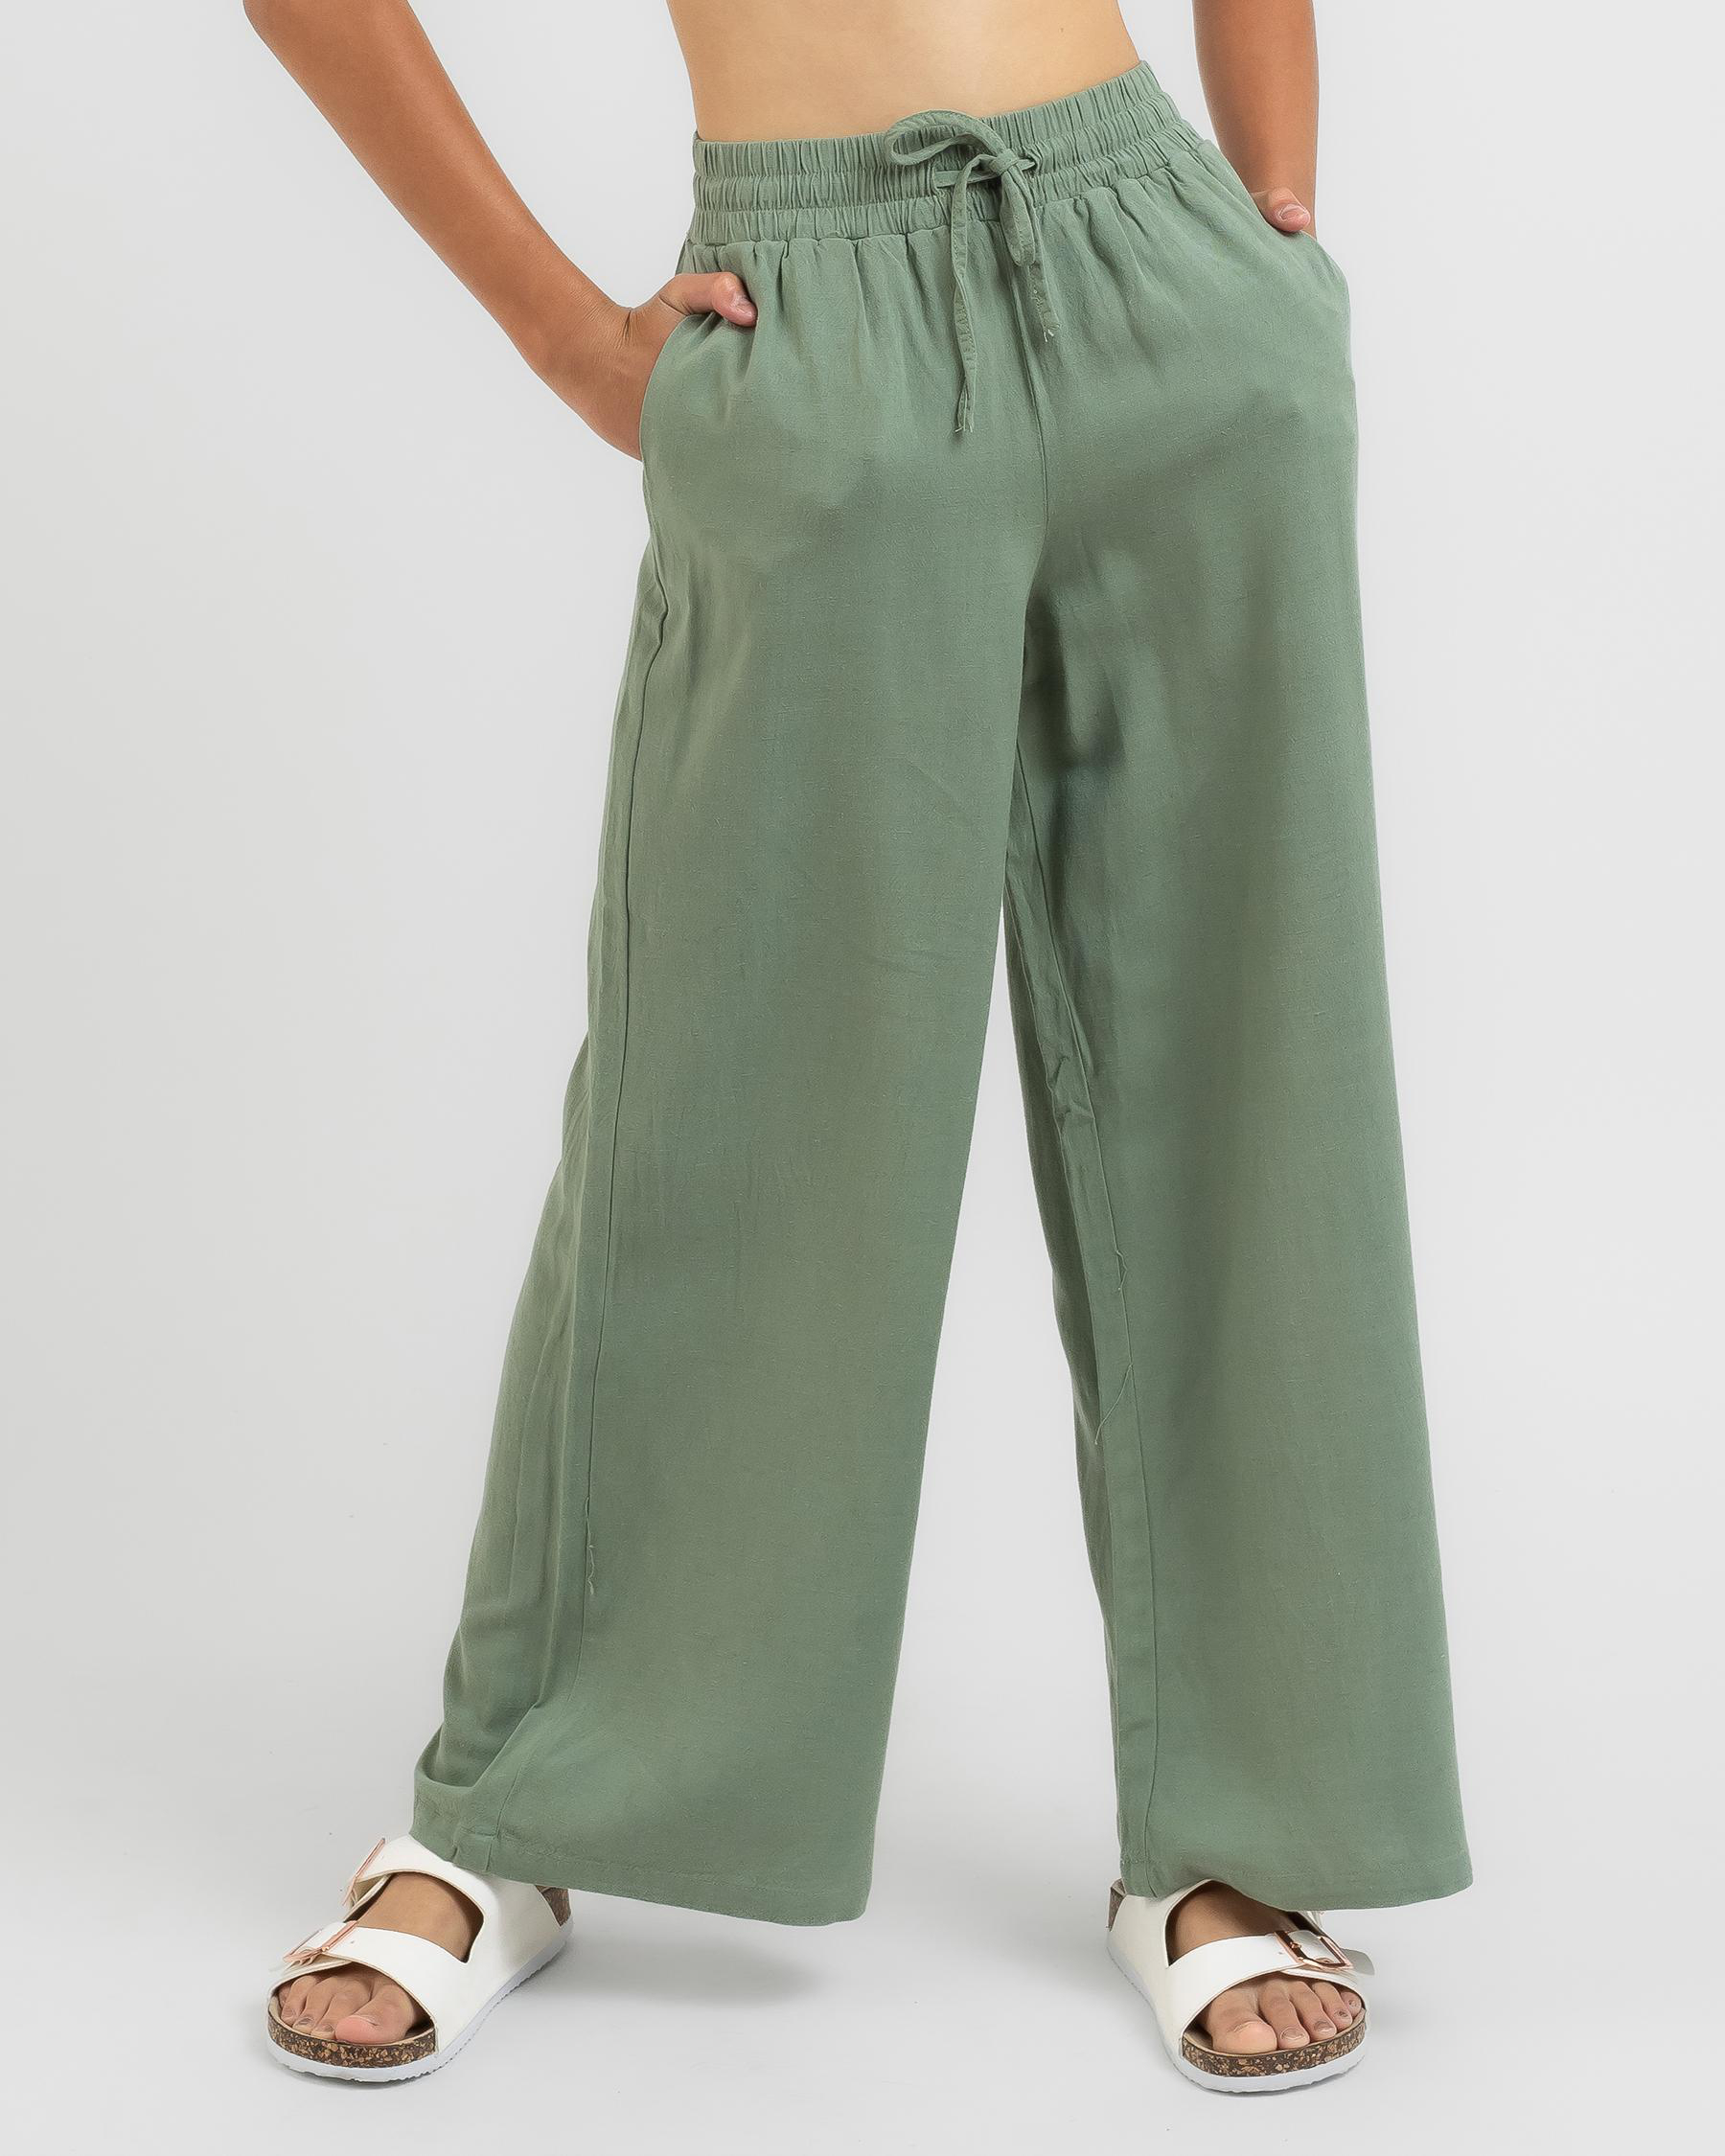 Rusty Girls' Ringleader Beach Pants In Dusty Teal - Fast Shipping ...